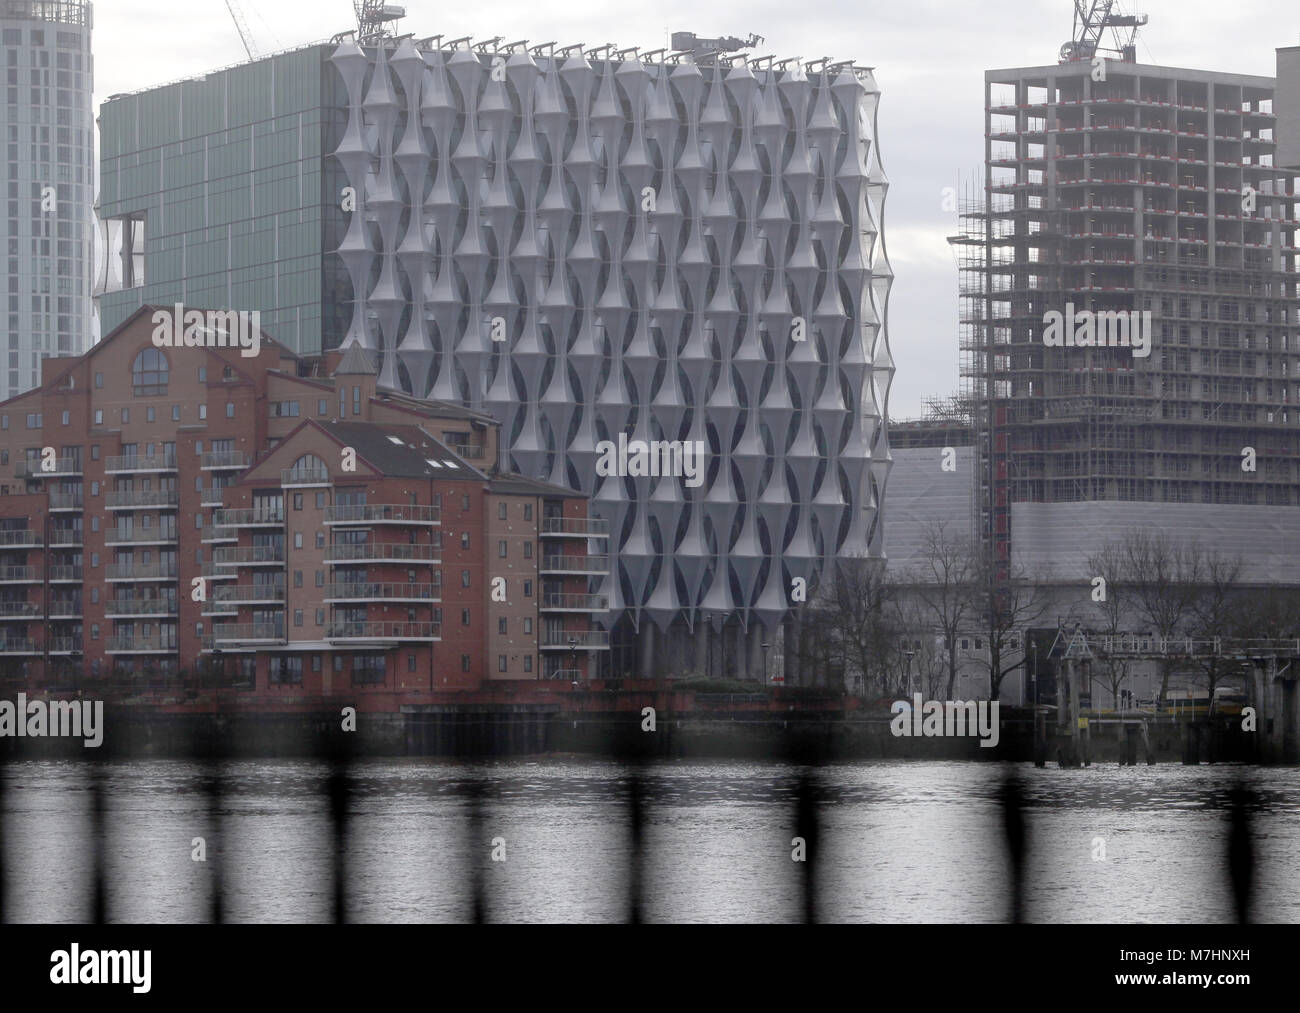 The new U.S. Embassy building is seen in its Nine Elms location on the South side of the River Thames, in London on March 11, 2018. Stock Photo